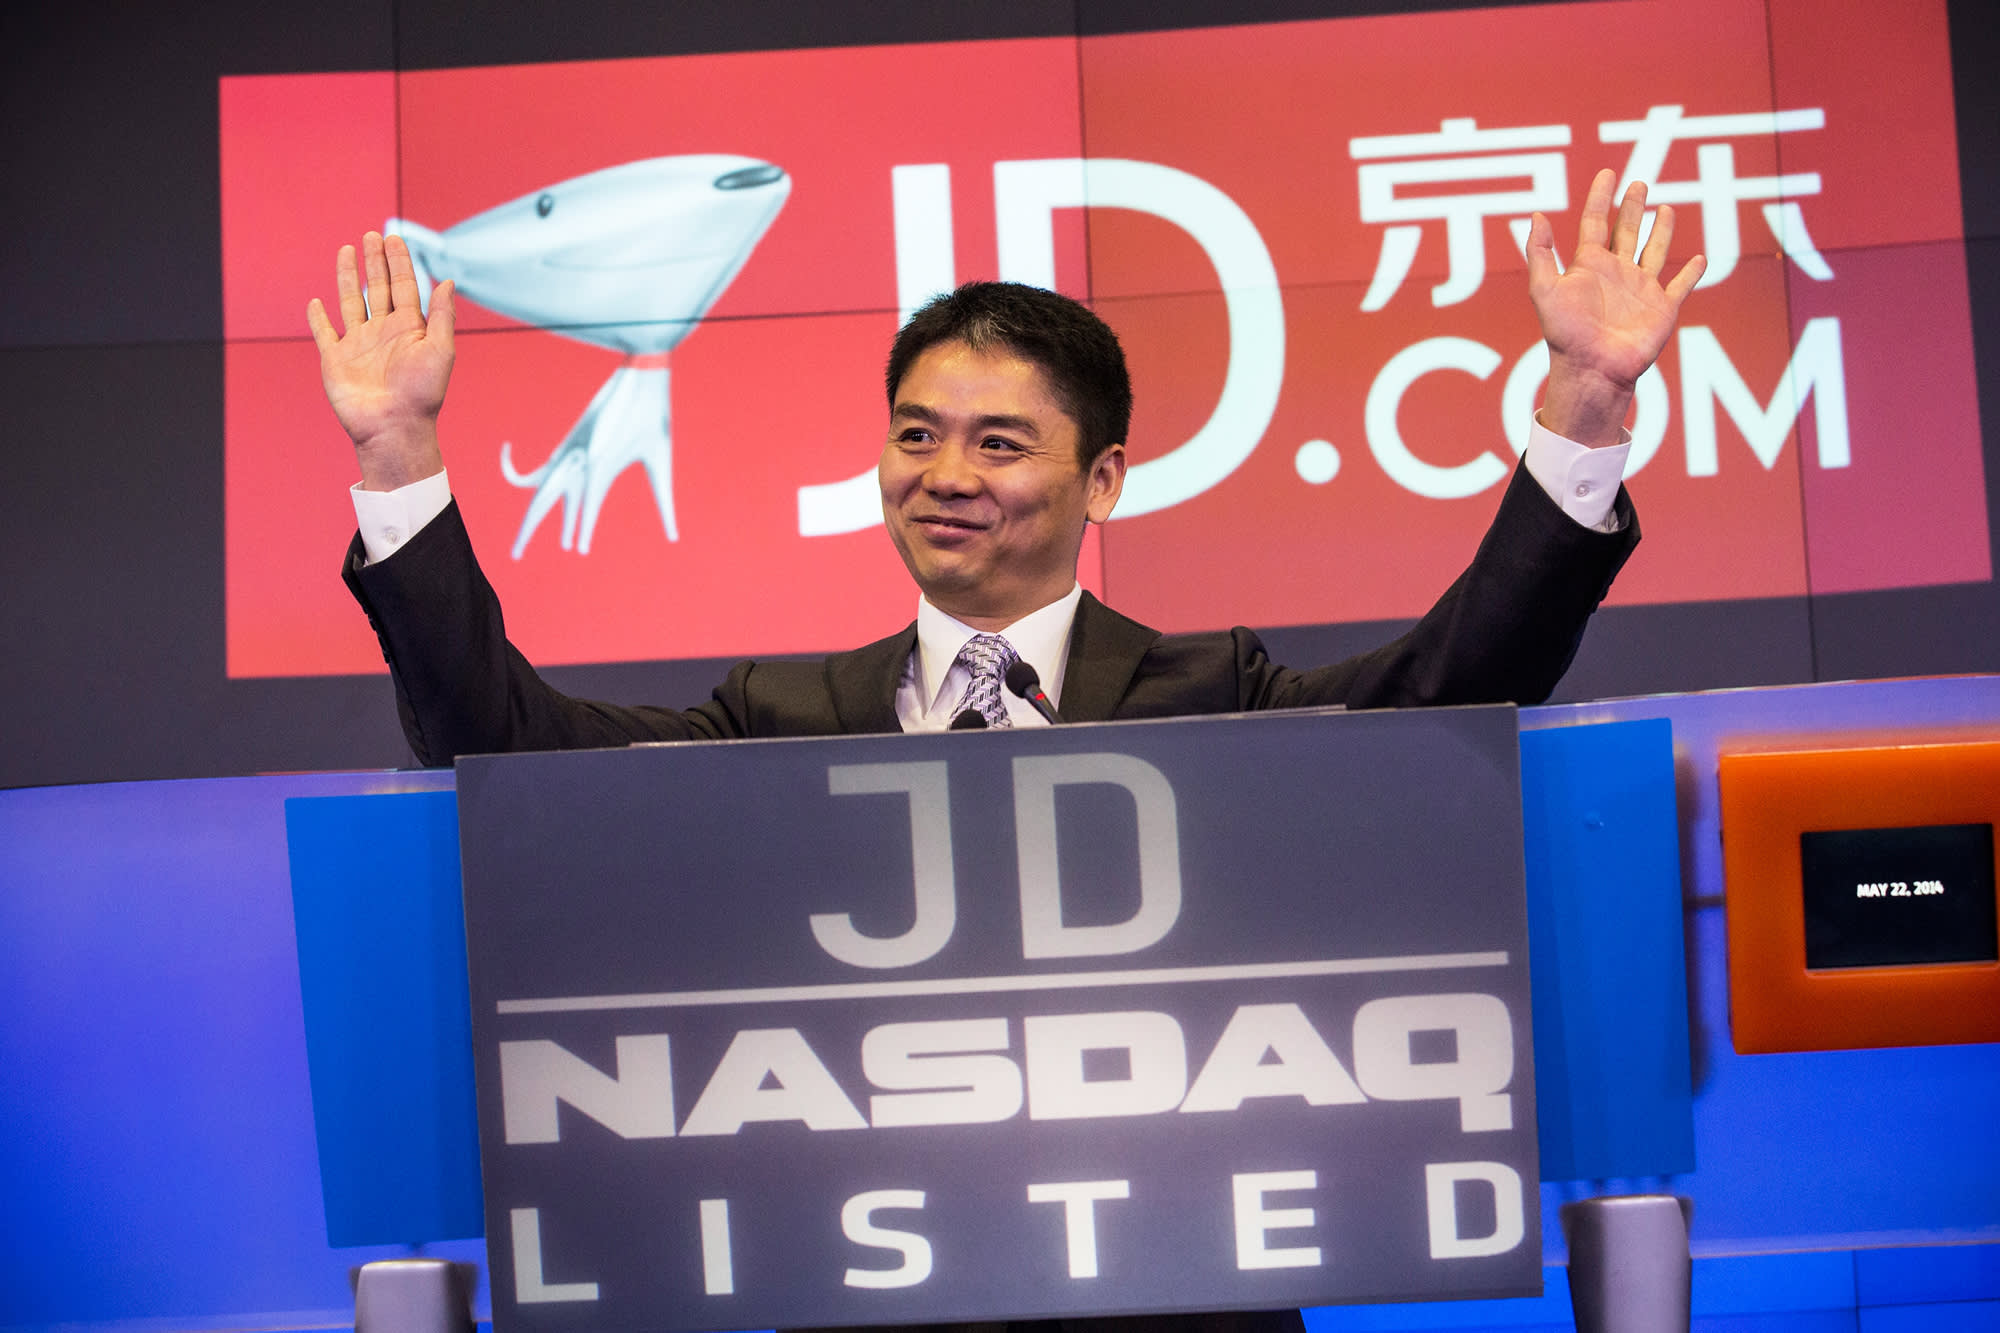 Jd com ipo leaked everything on forex